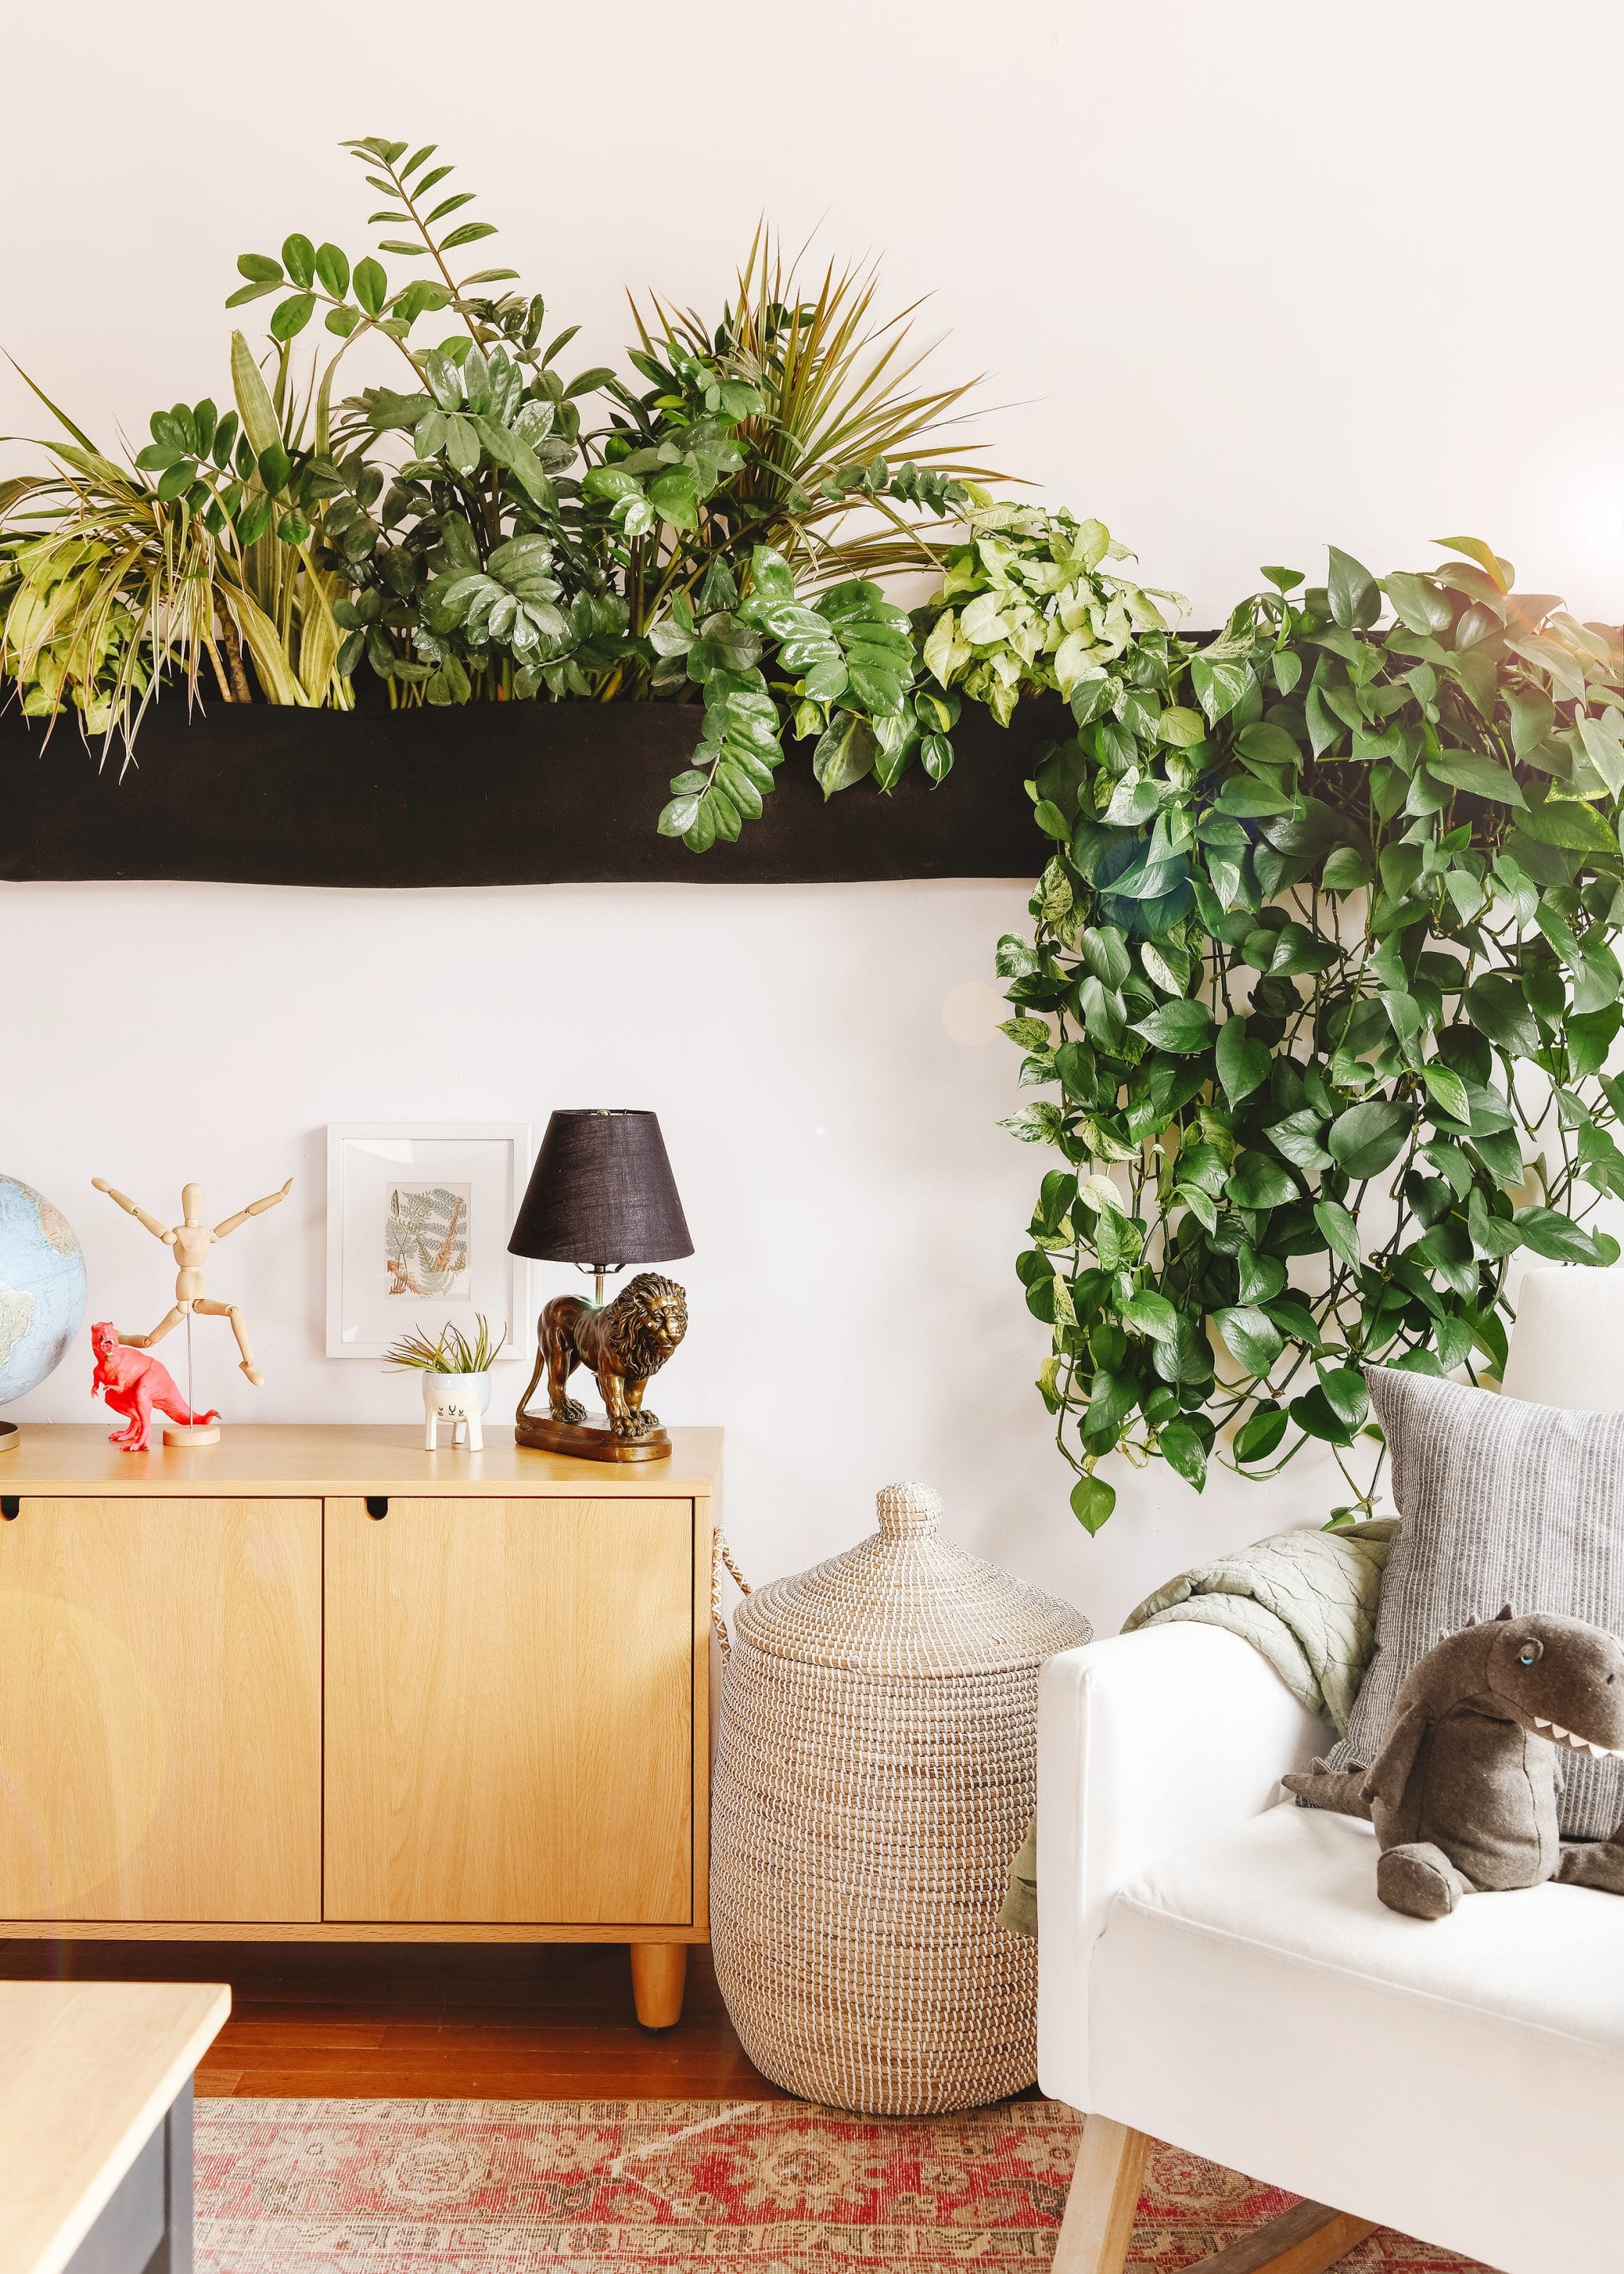 living wall planter in Lucy's playroom | How We Care for Houseplants via Yellow Brick Home #houseplants